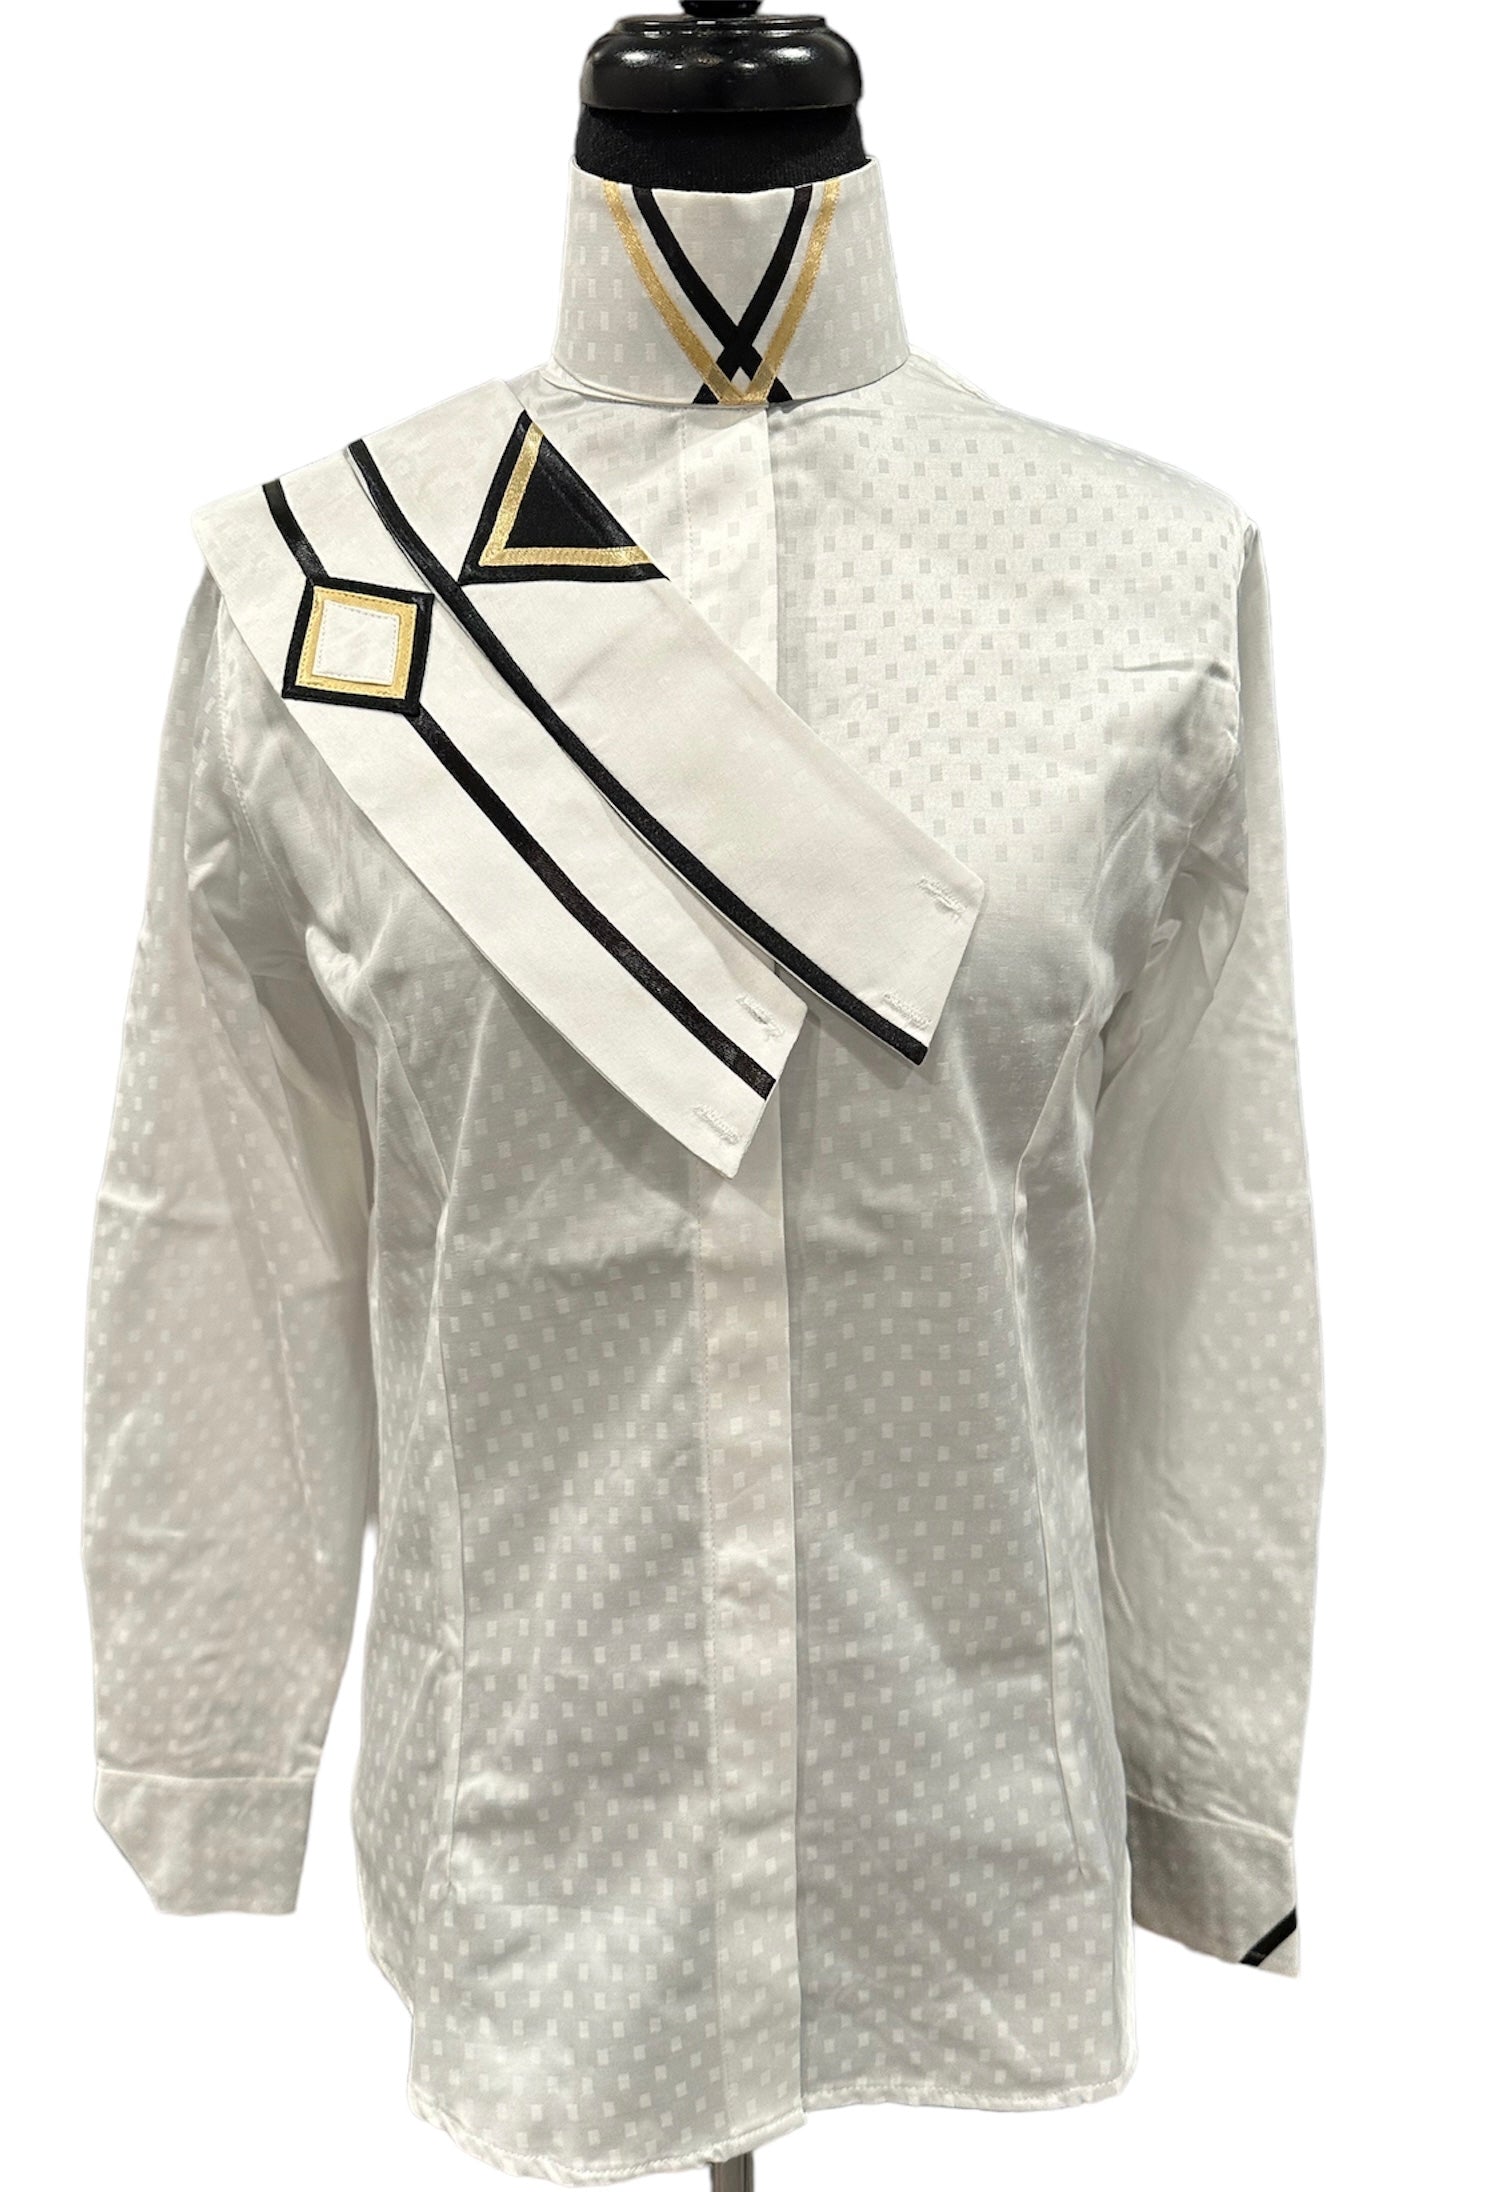 English Show Shirt White with Black and Gold Fabric Code V02